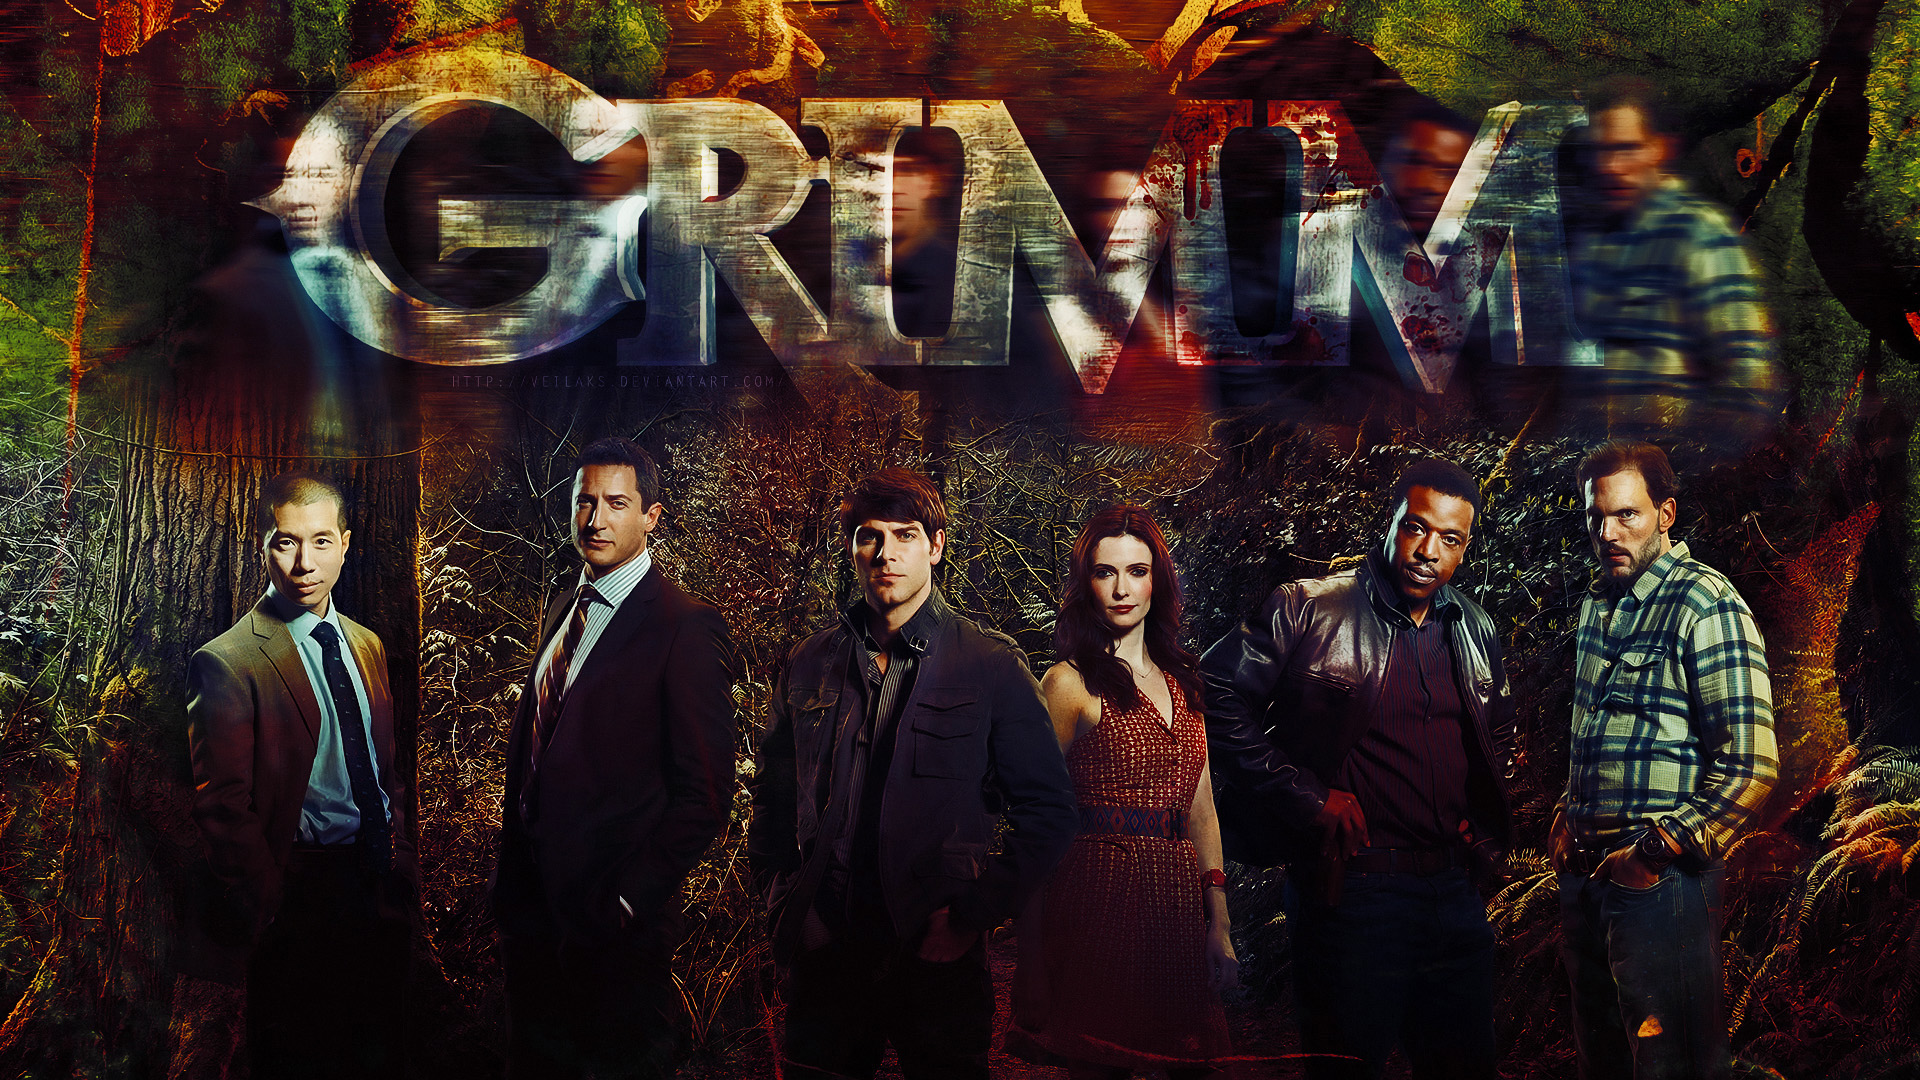 Grimm Image HD Wallpaper And Background Photos